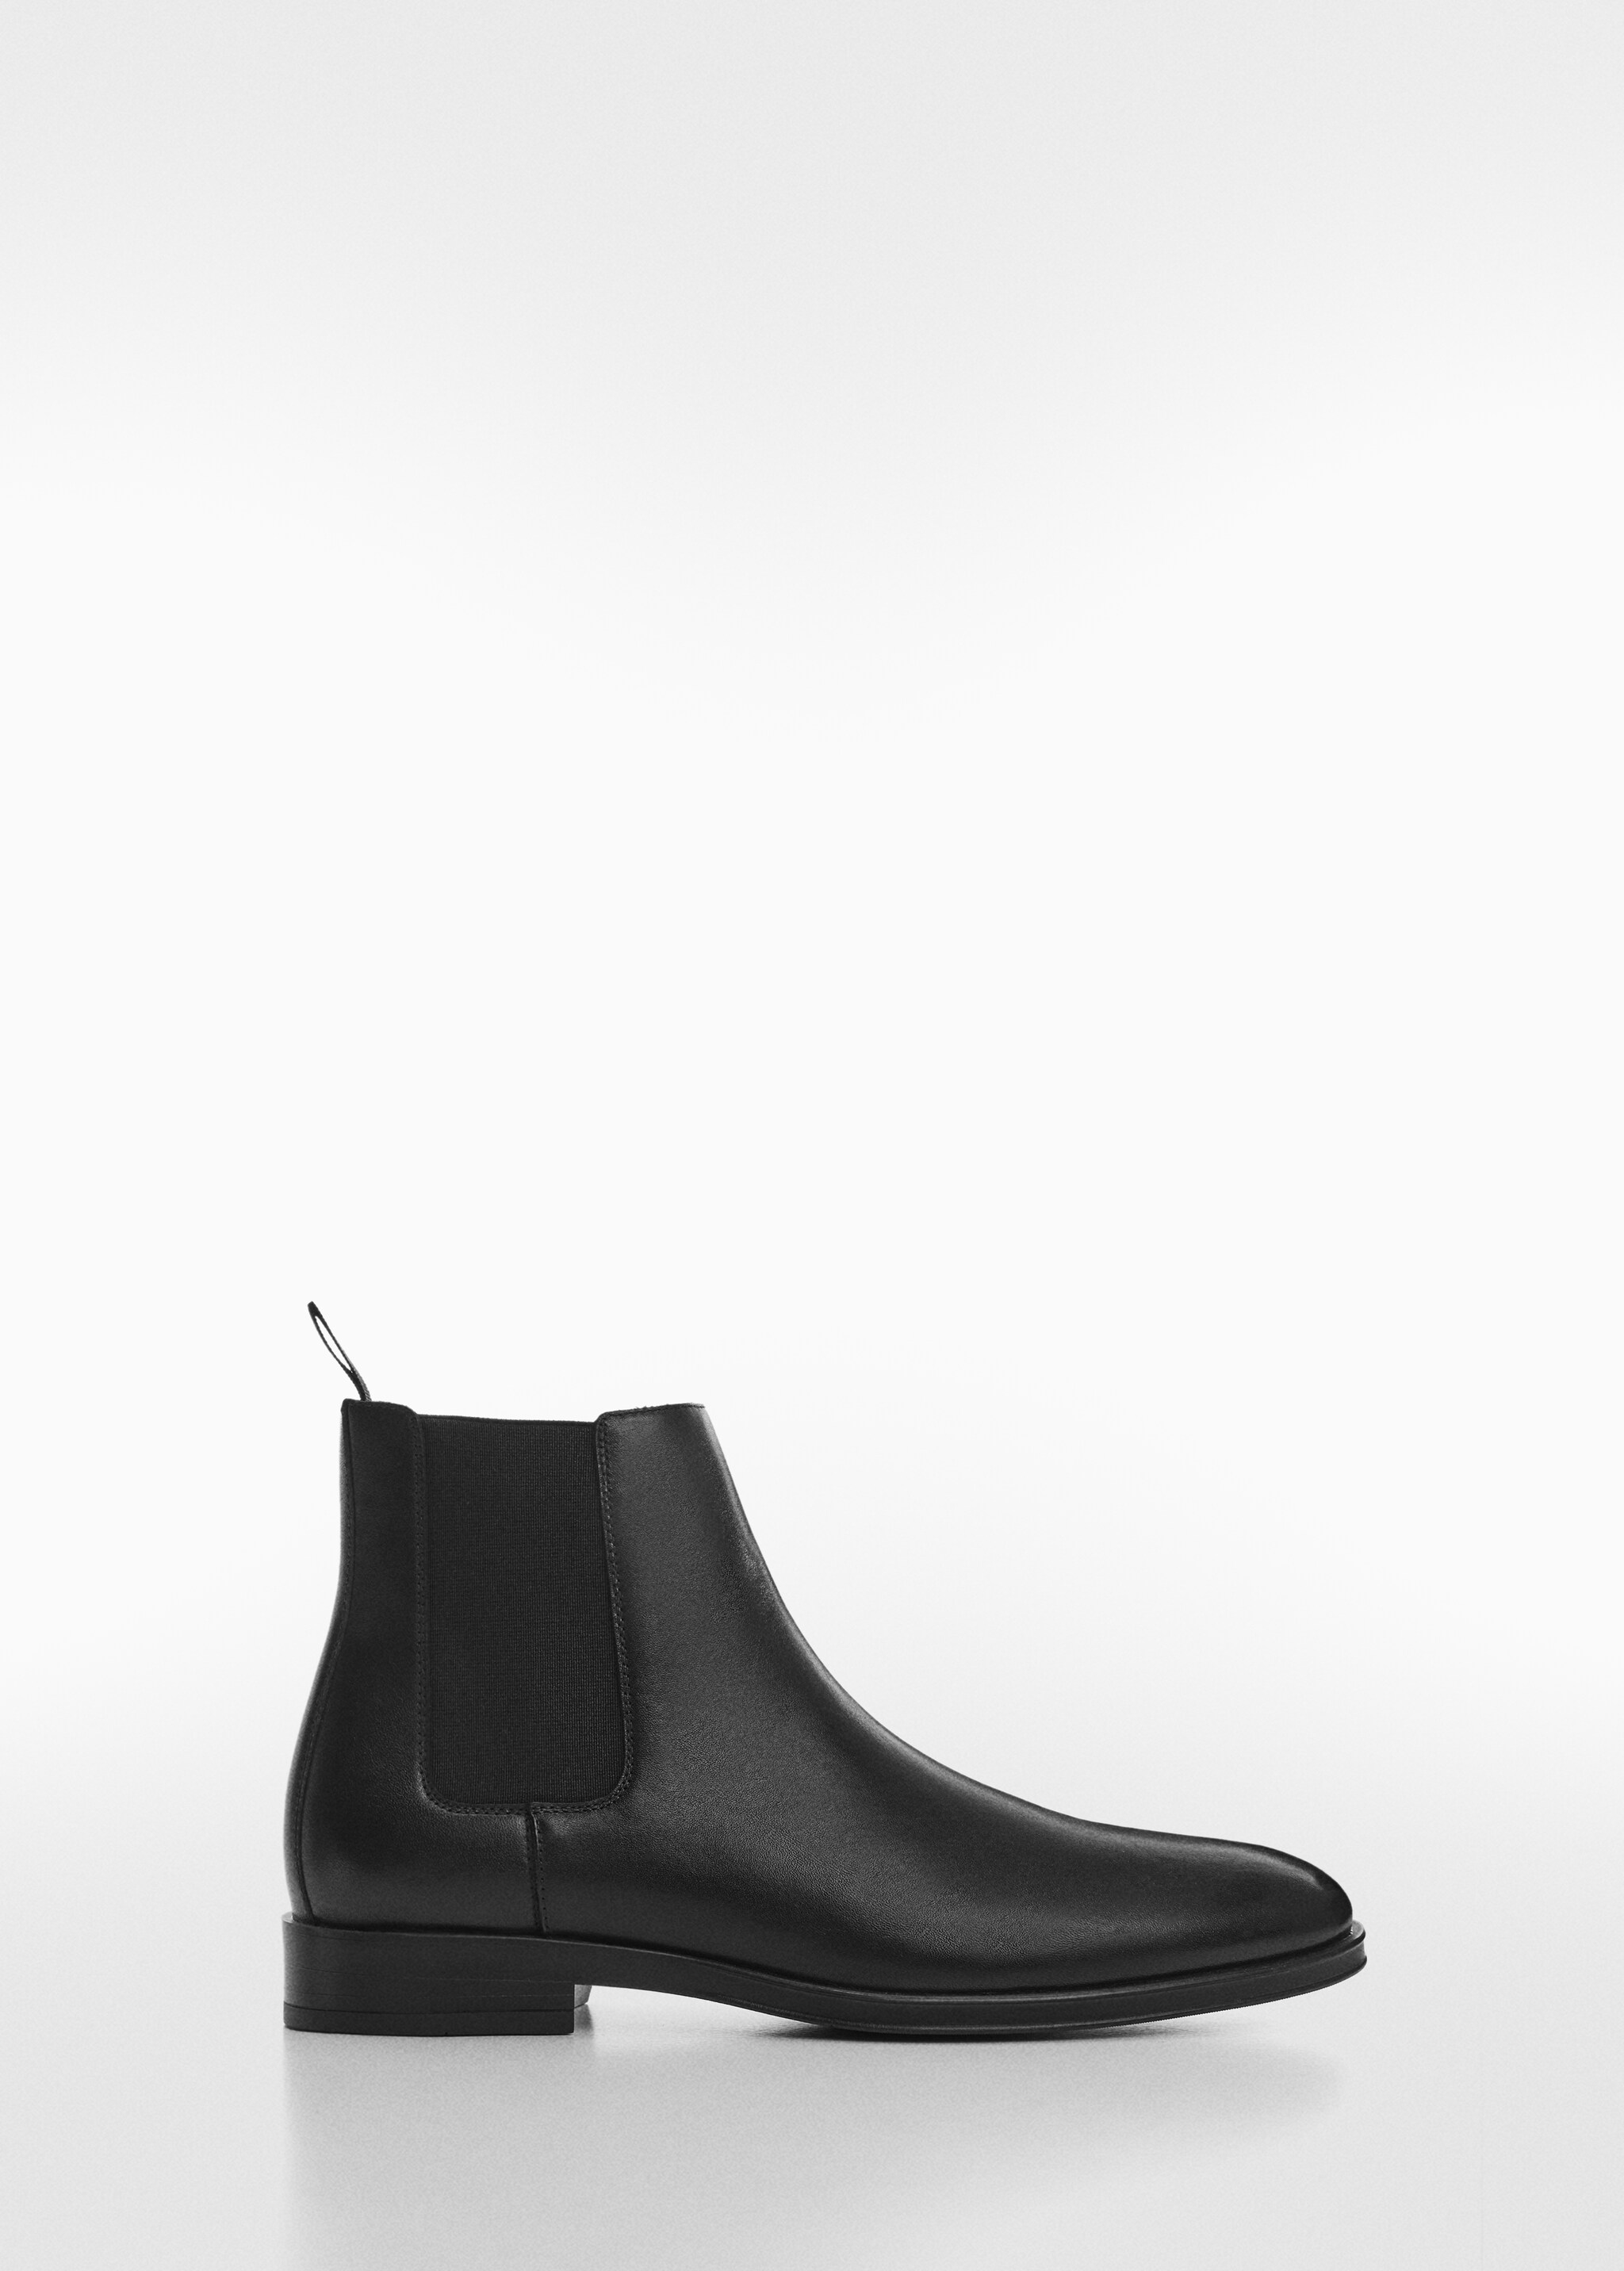 Polished leather chelsea boots - Article without model